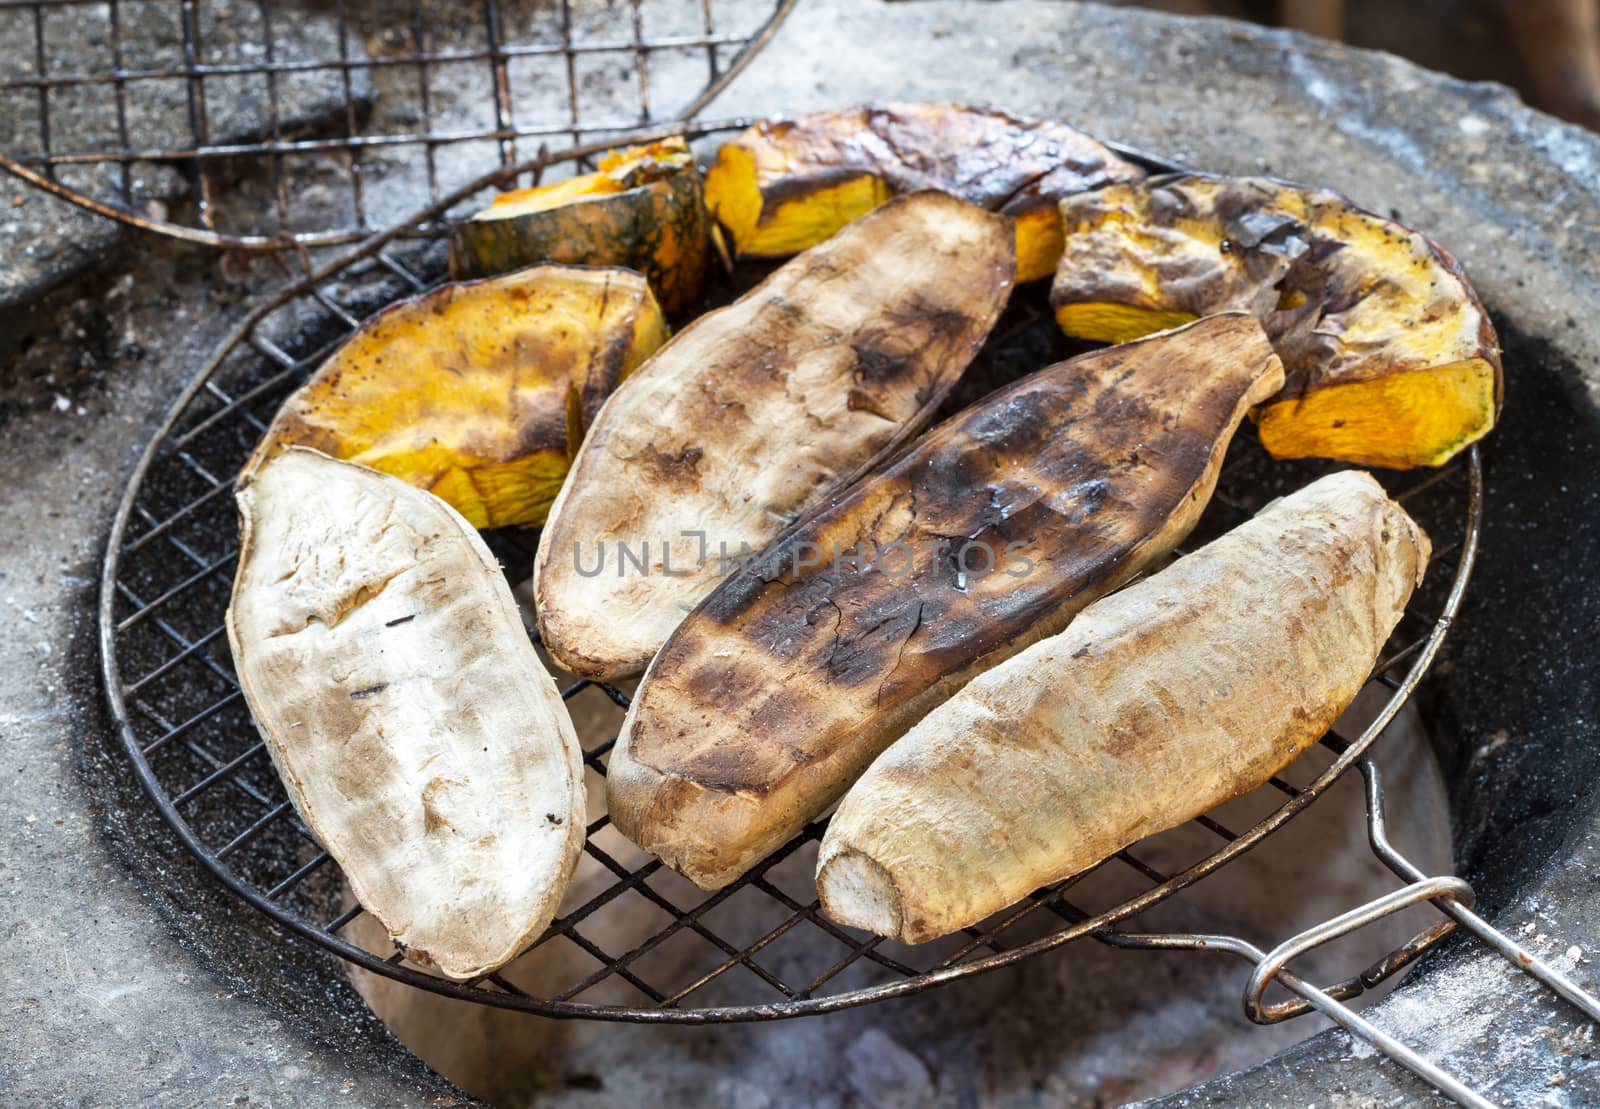 Sweet Potatoes and Pumpkins grilled on stove